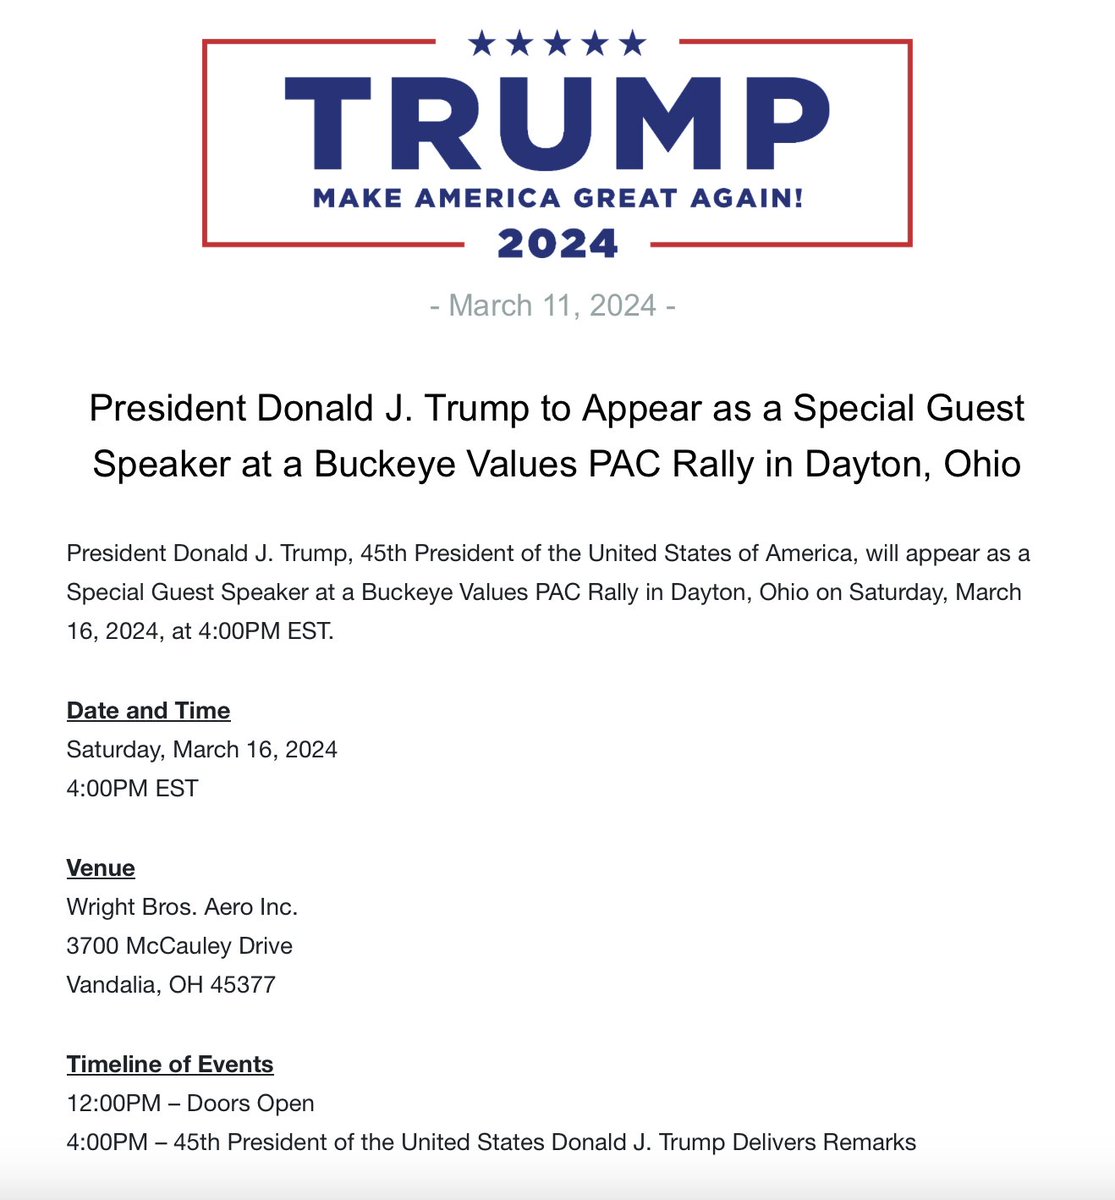 BREAKING: President Trump is coming to rally in Ohio this Saturday in support of @berniemoreno's campaign for US Senate!!! REGISTER FOR YOUR TICKETS HERE: event.donaldjtrump.com/events/preside…